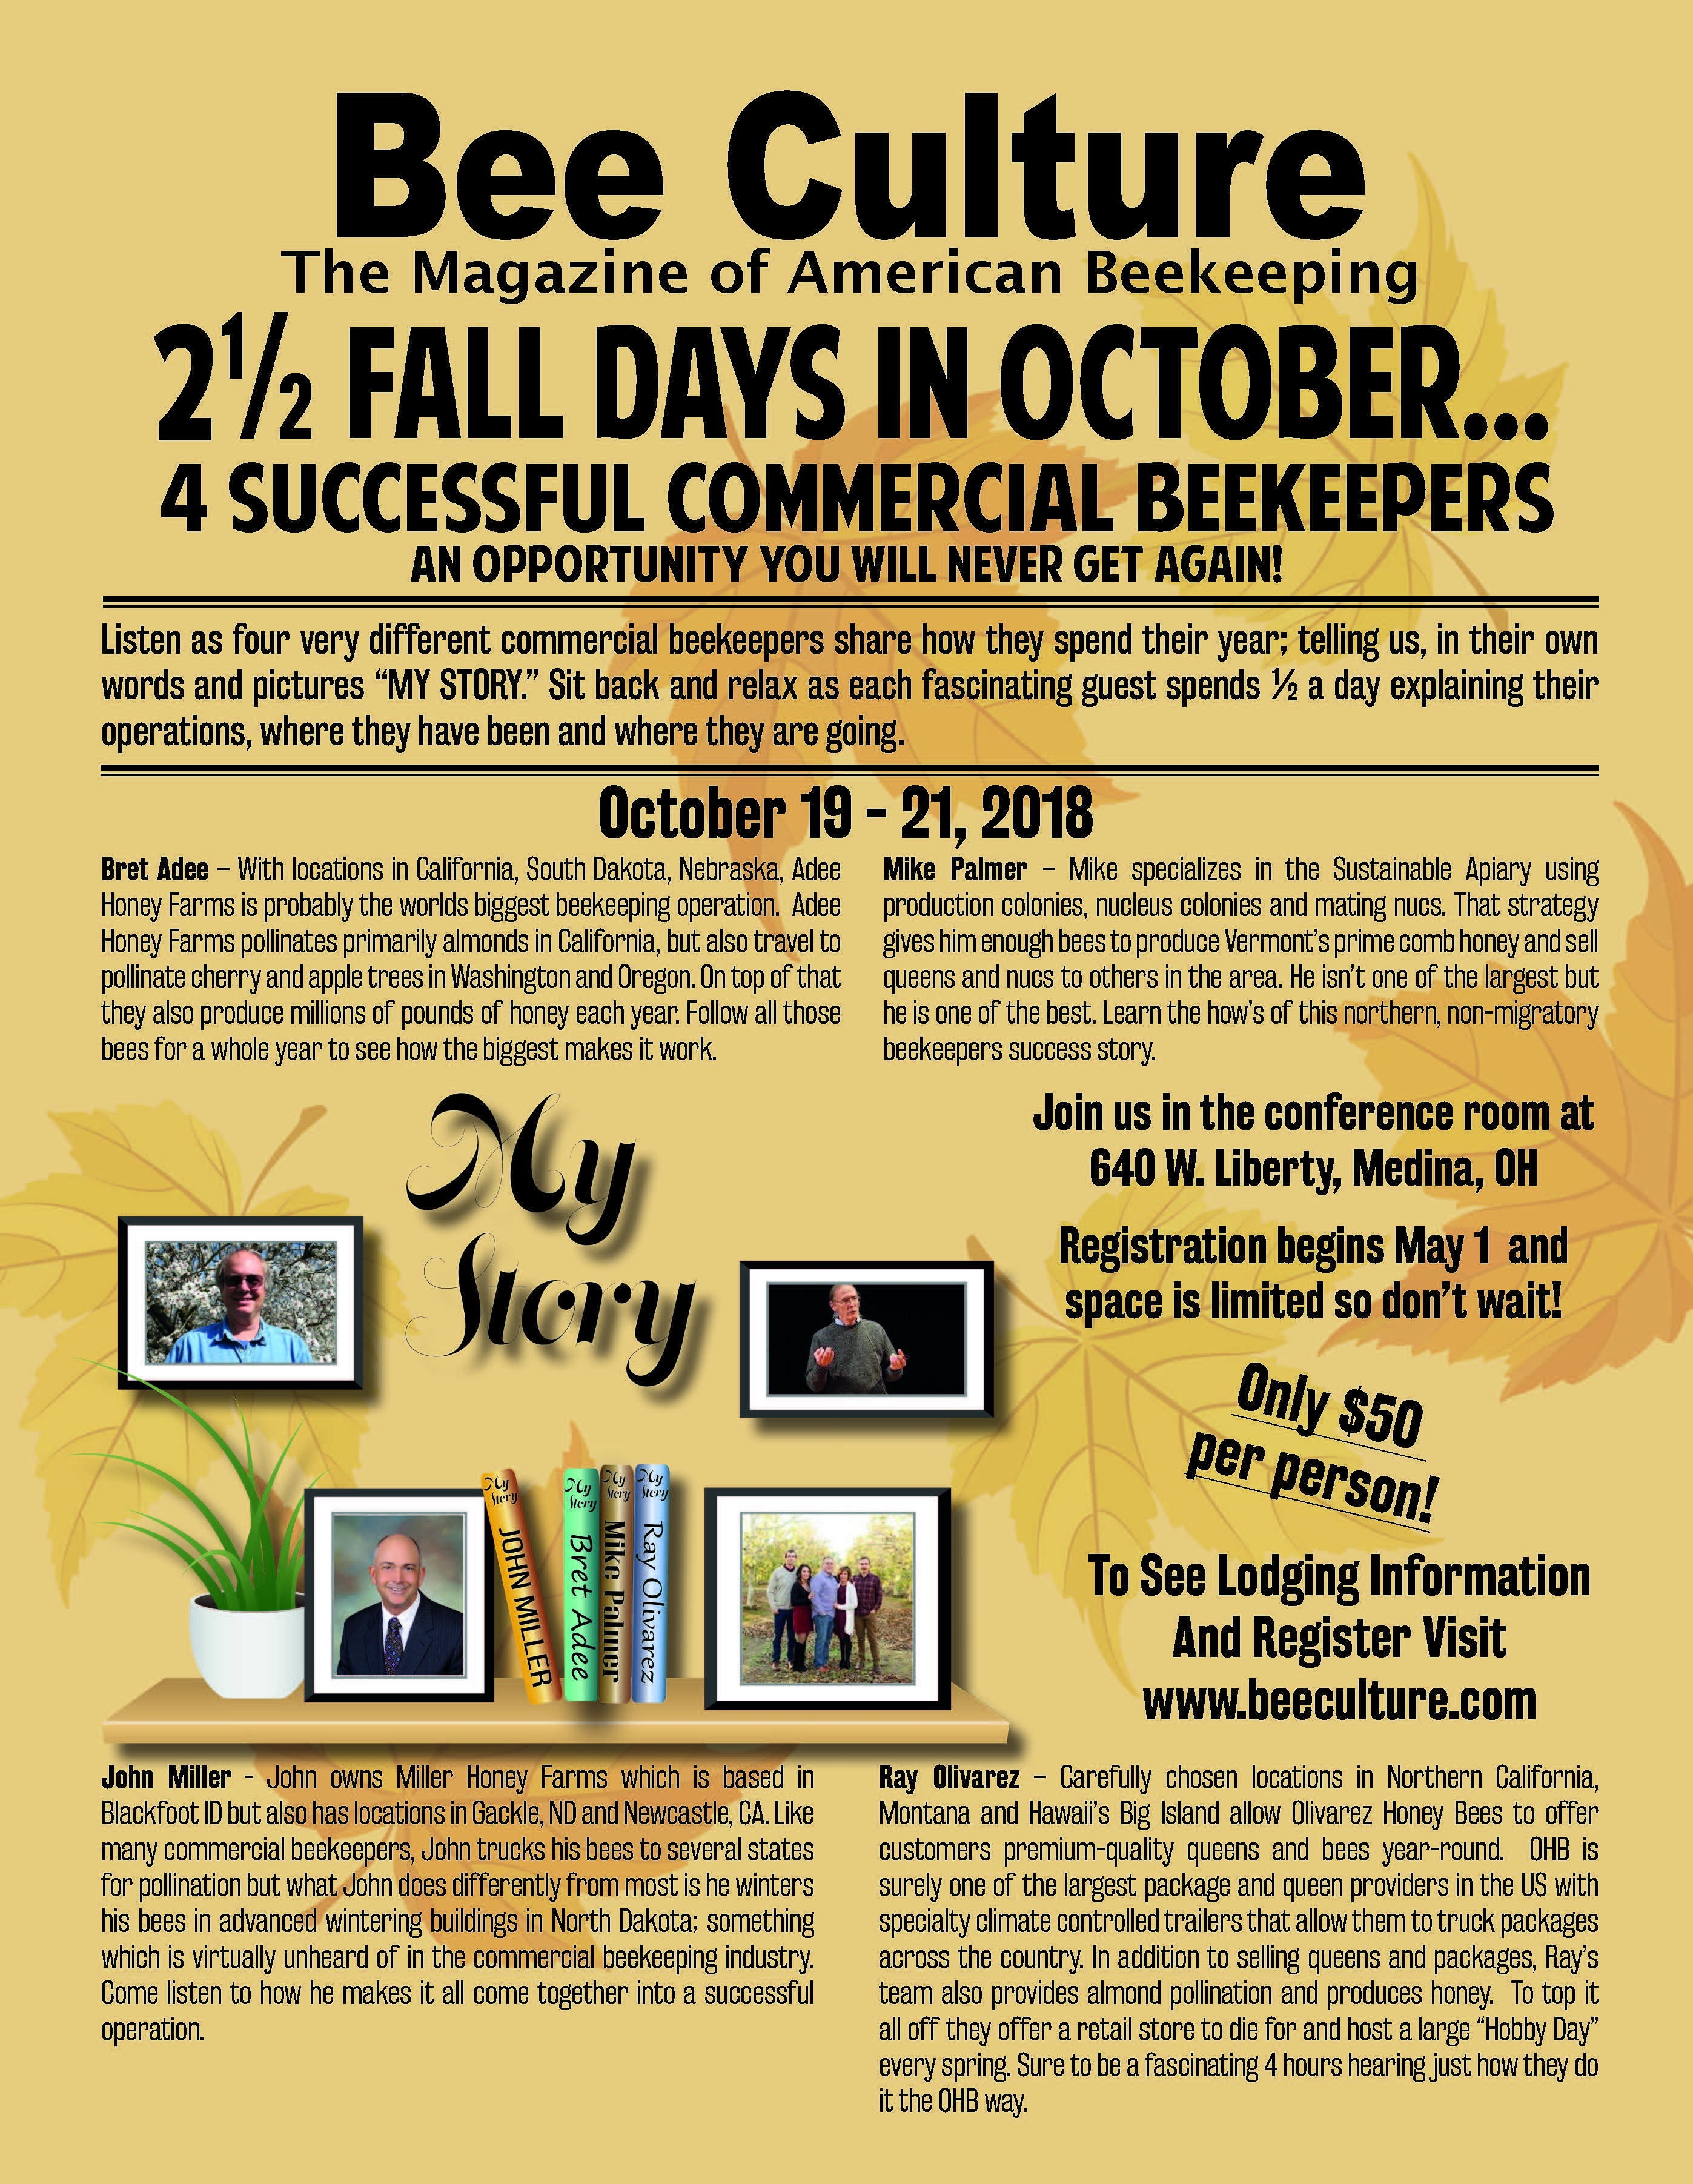 Bee Culture’s Event – “My Story” – October 2018